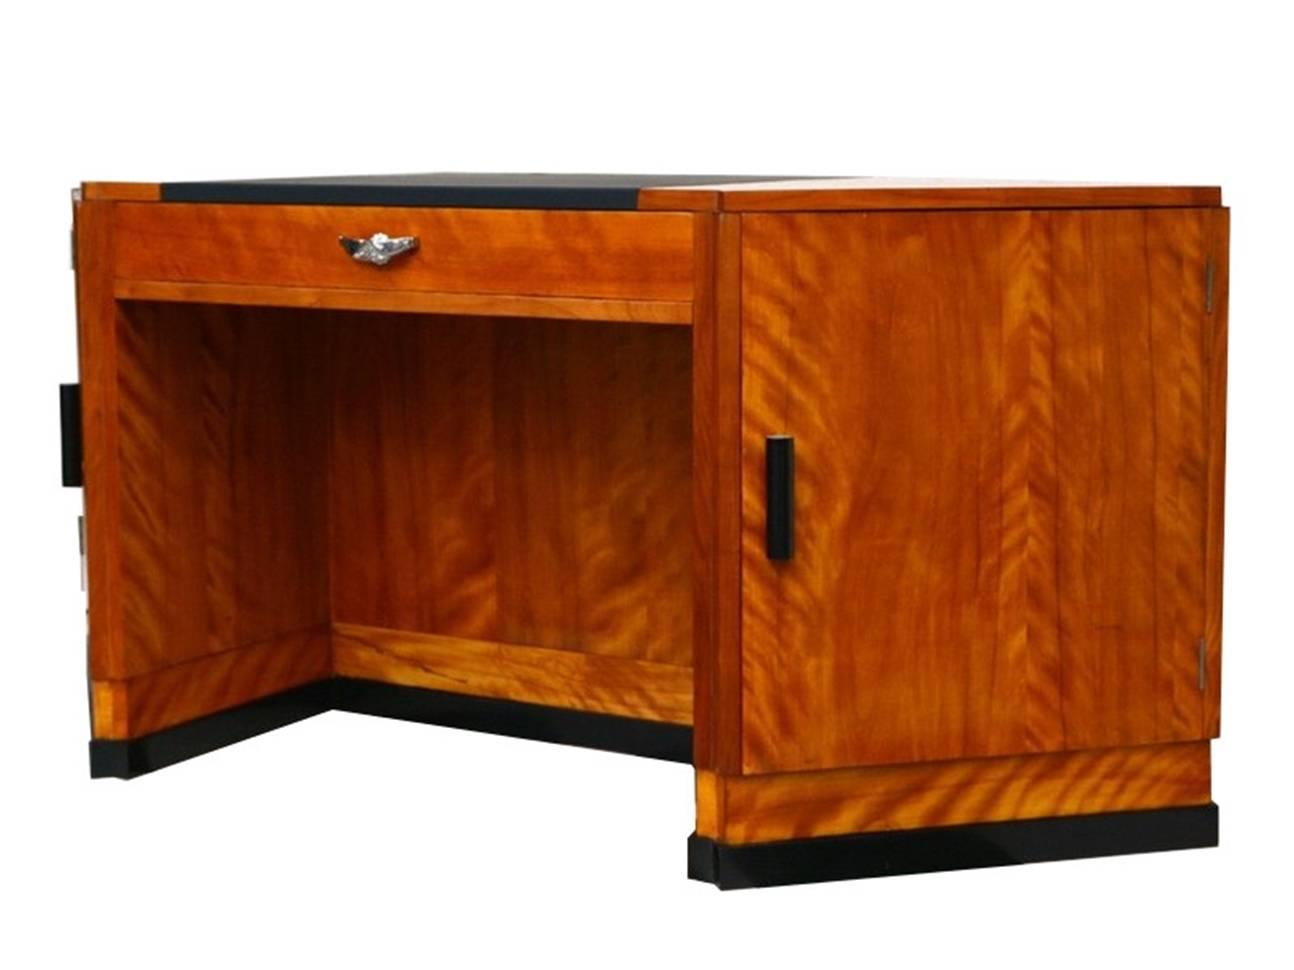 Art Deco desk with a black writing area. It convinces with its stylish exterior and the luxurious cherry and mahogany woods. Additionally it offers plenty of storage space and a big surface.

Big central drawer.
extraordinary body with hexagonal